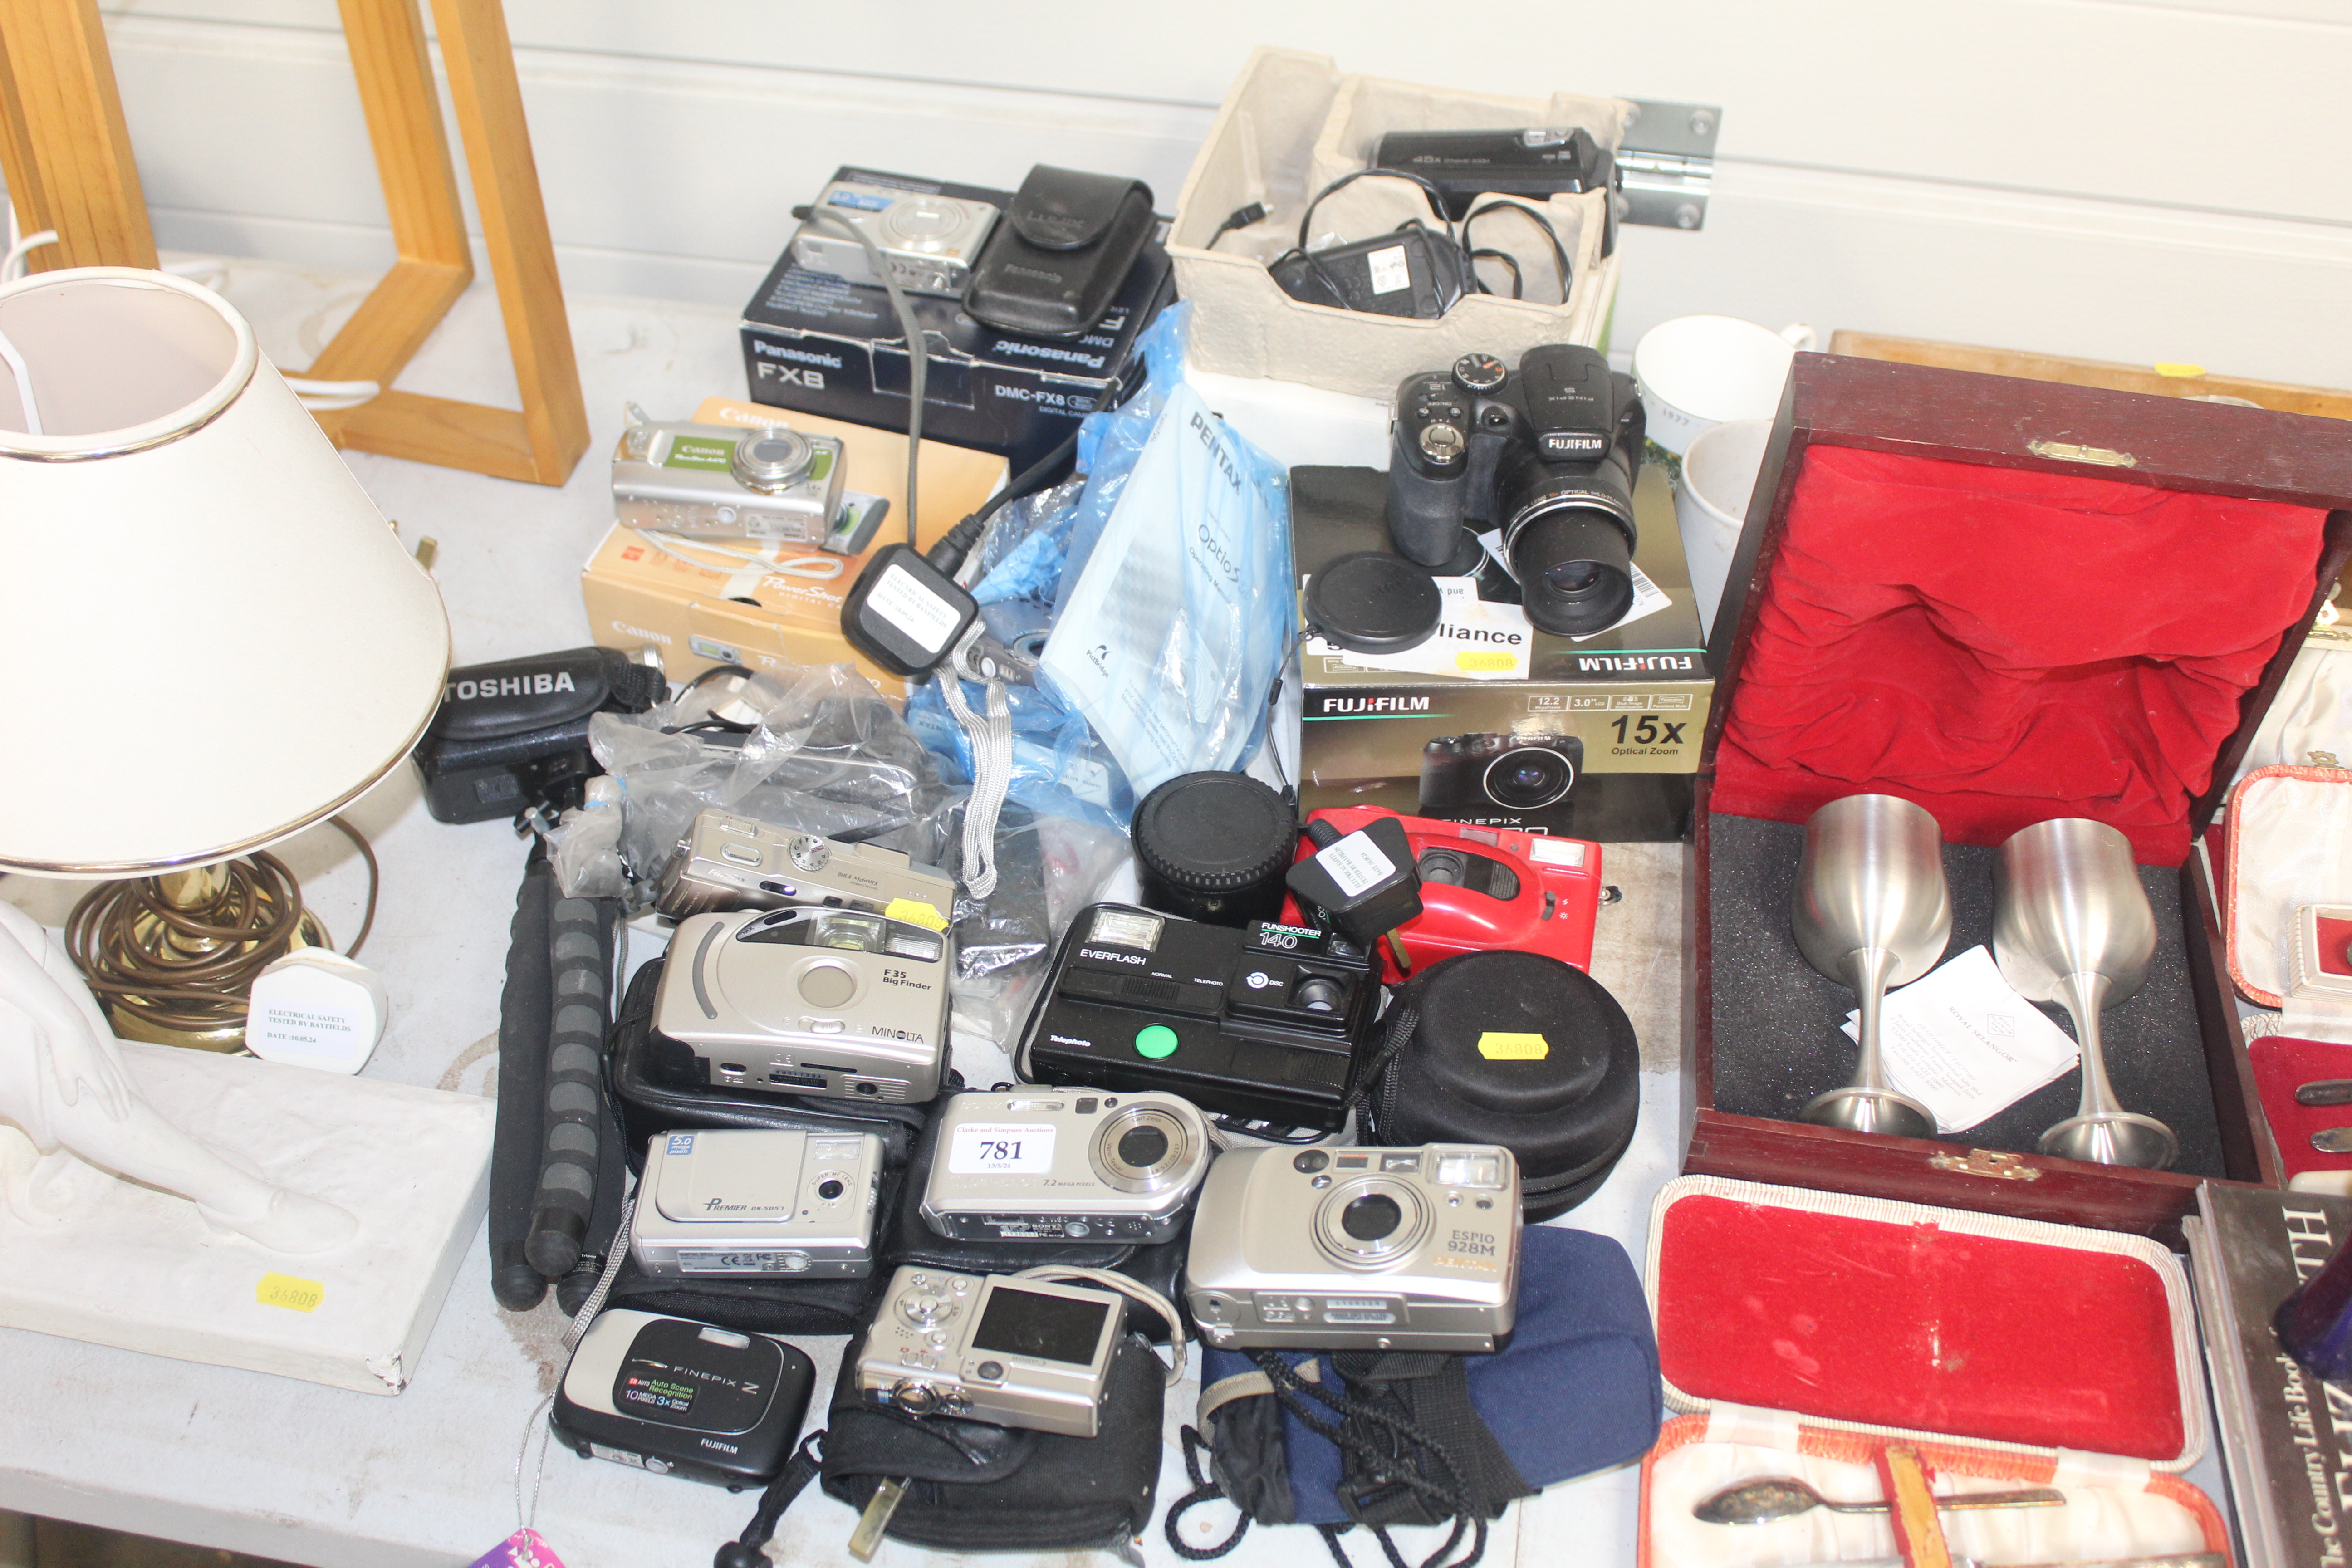 A collection of various cameras and accessories